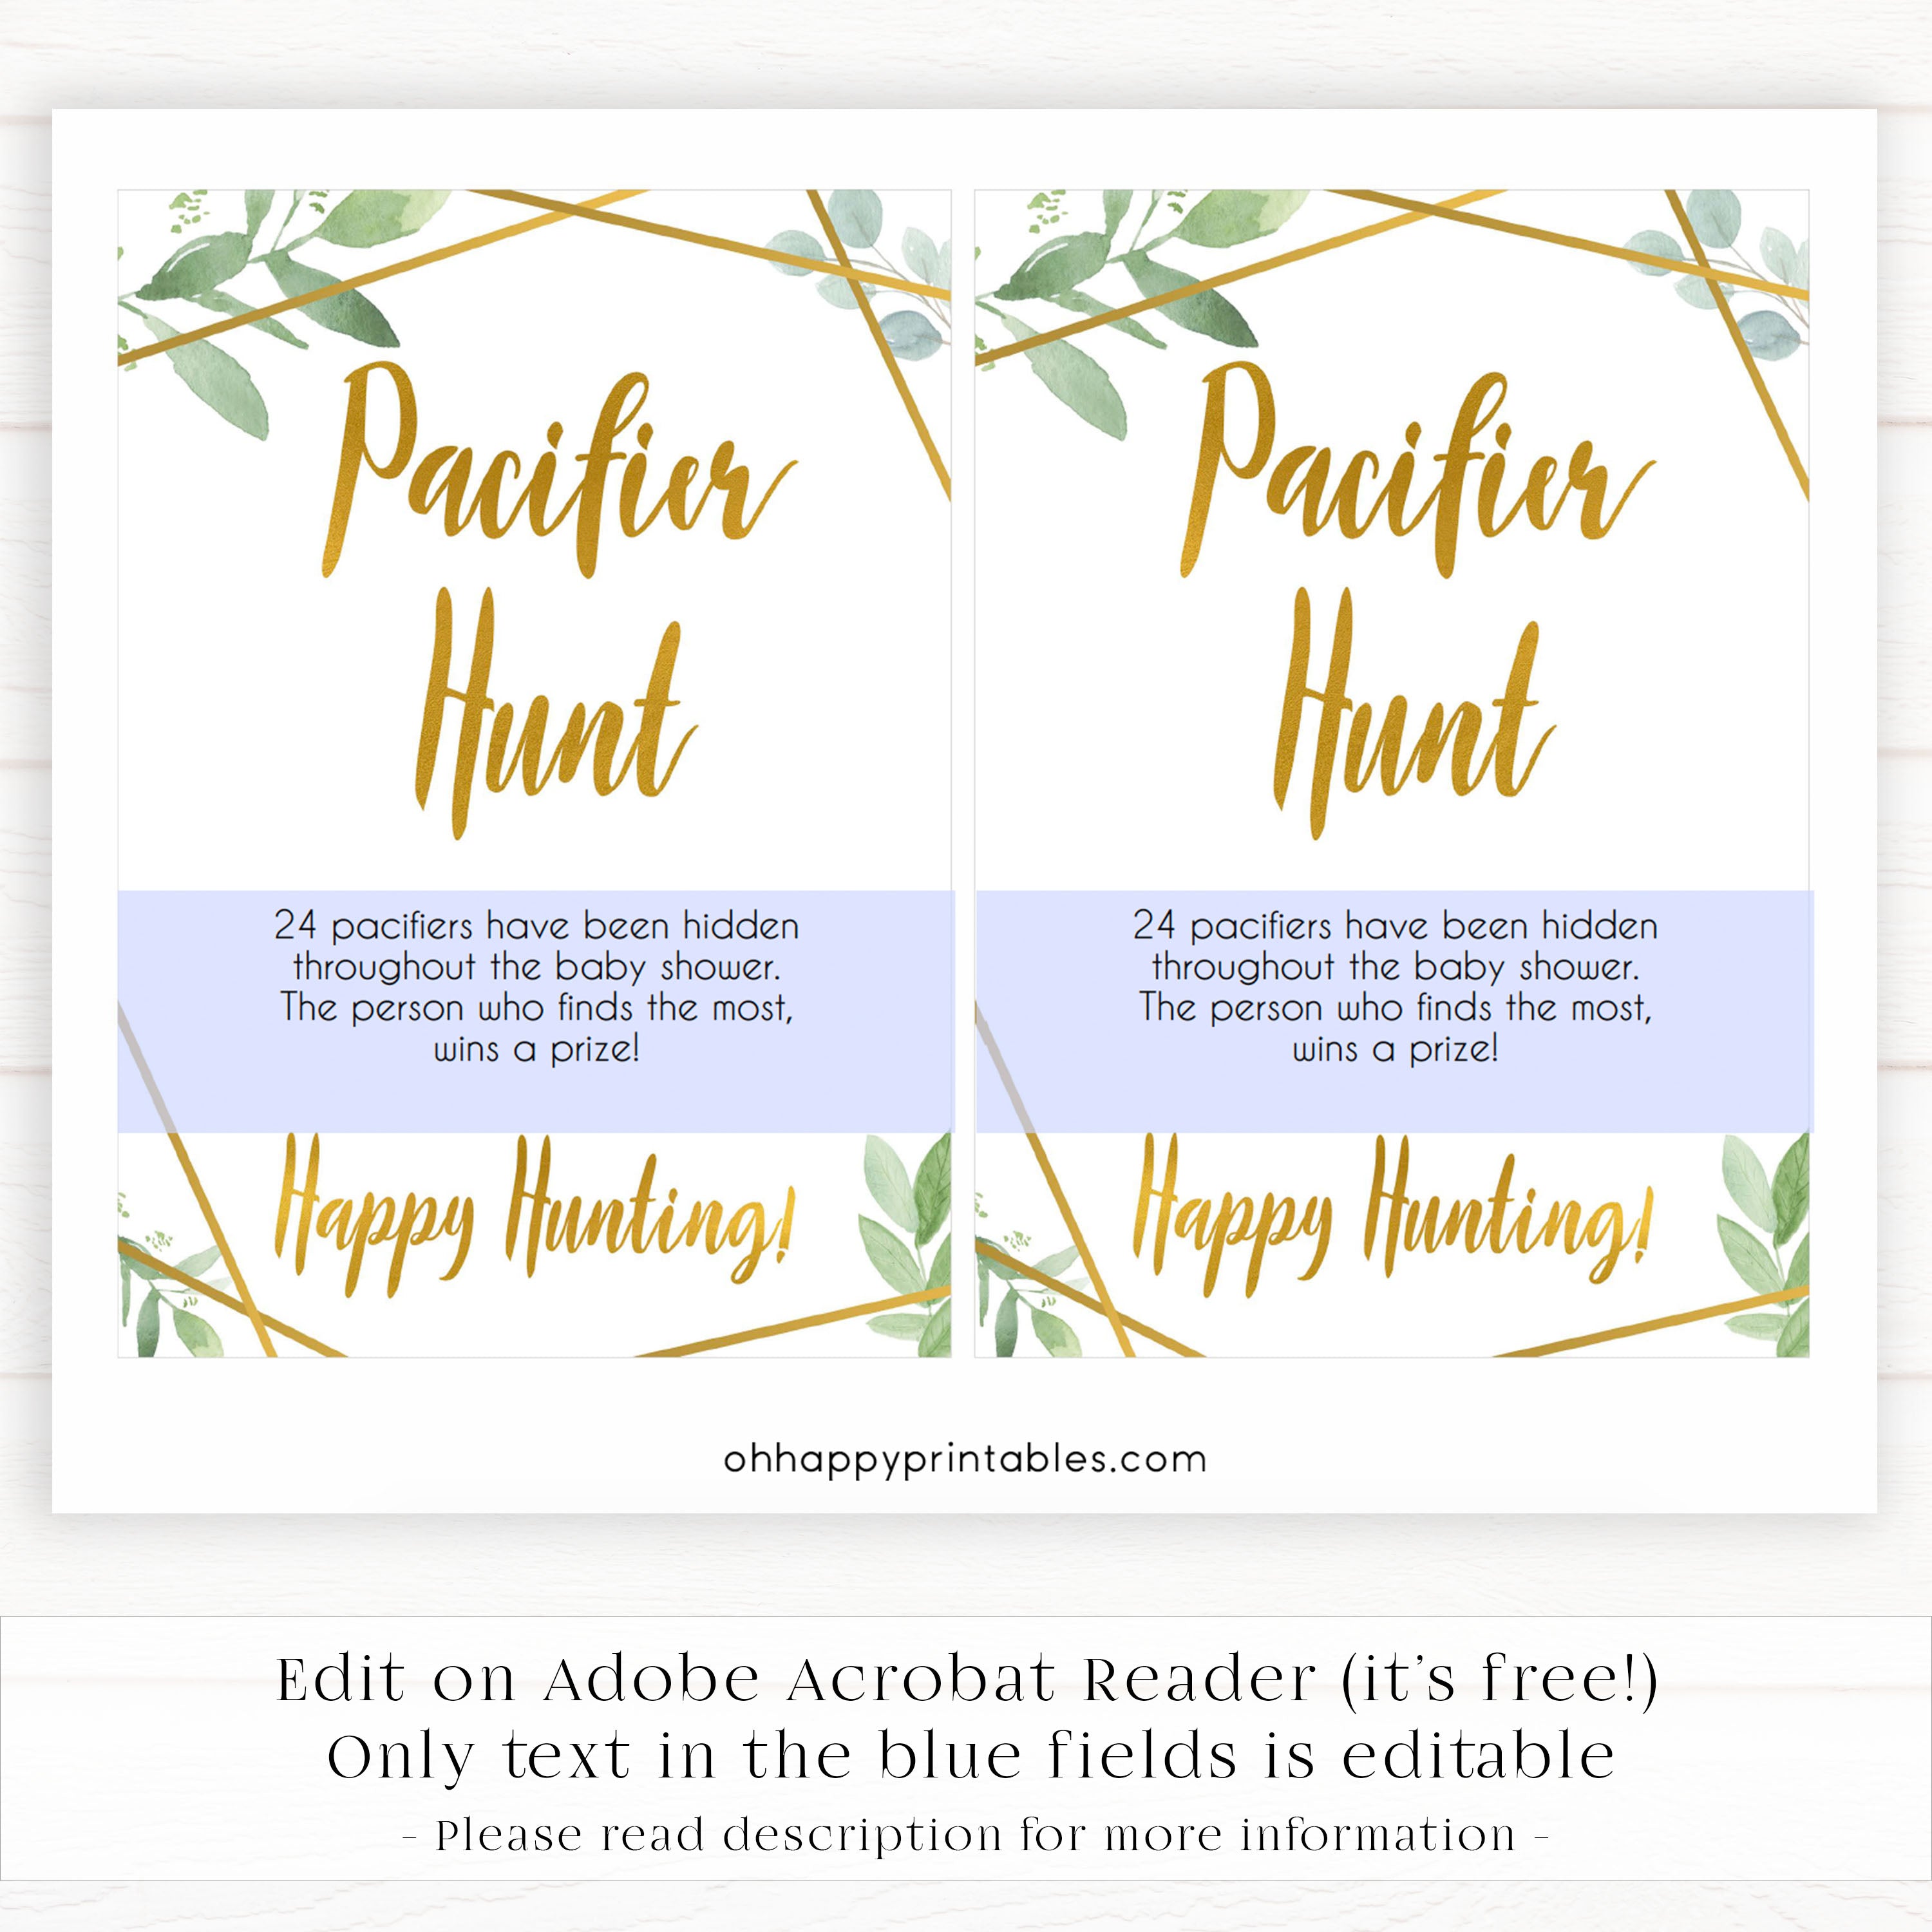 pacifier hunt game, Printable baby shower games, geometric fun baby games, baby shower games, fun baby shower ideas, top baby shower ideas, gold baby shower, blue baby shower ideas